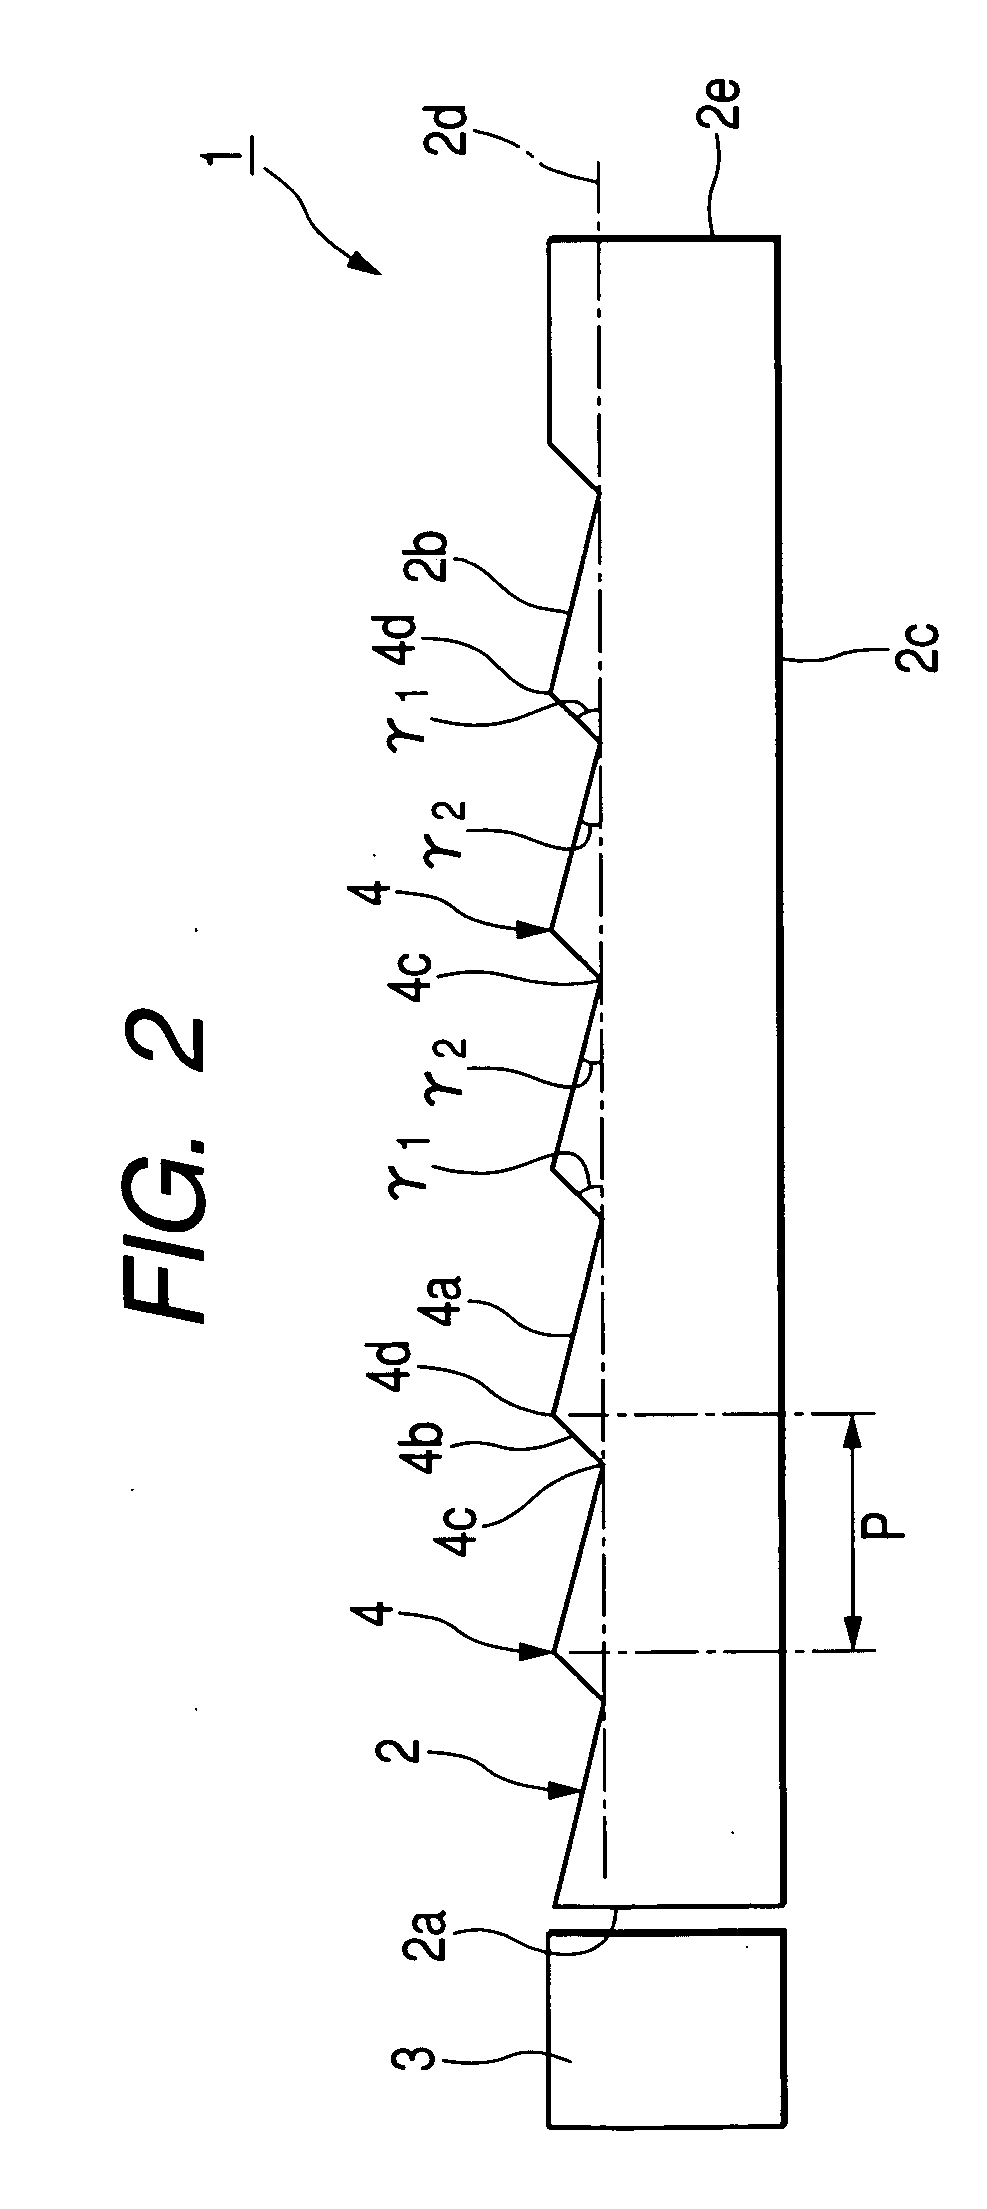 Prism sheet, illuminating device, surface emitting device, and liquid crystal display device